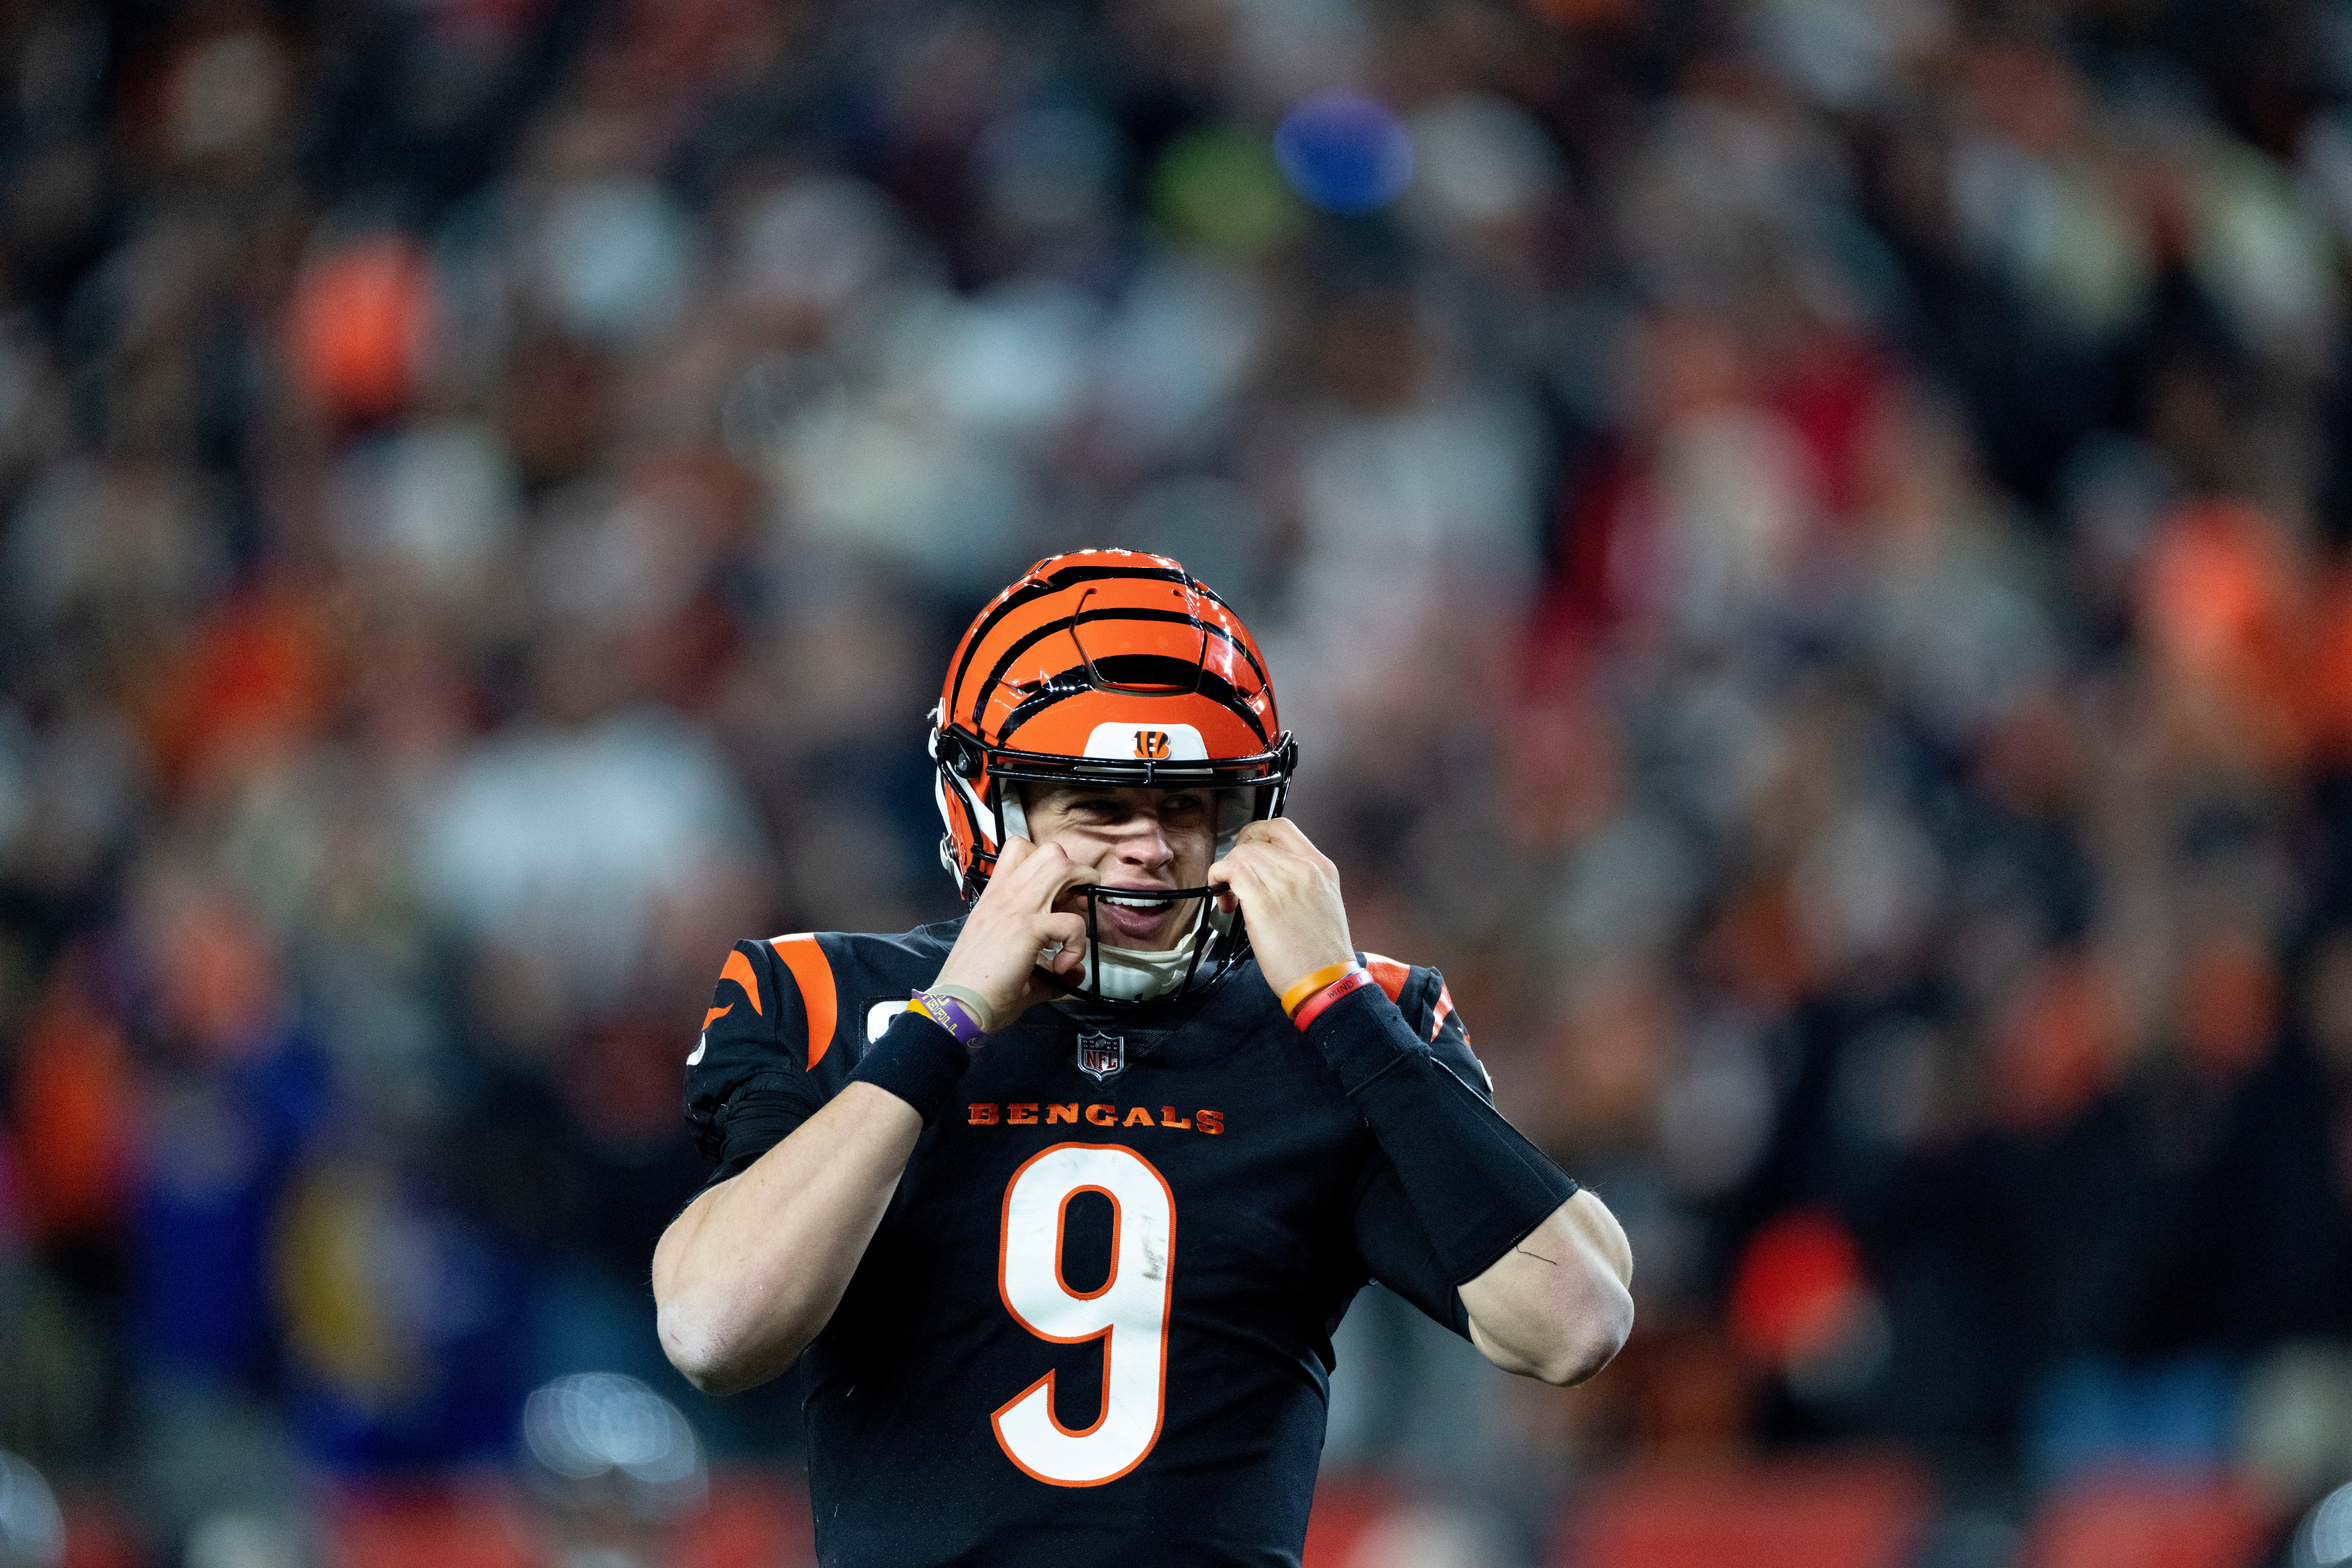 Behind the scenes: Check out the extensive planning for the Cincinnati Bengals to travel